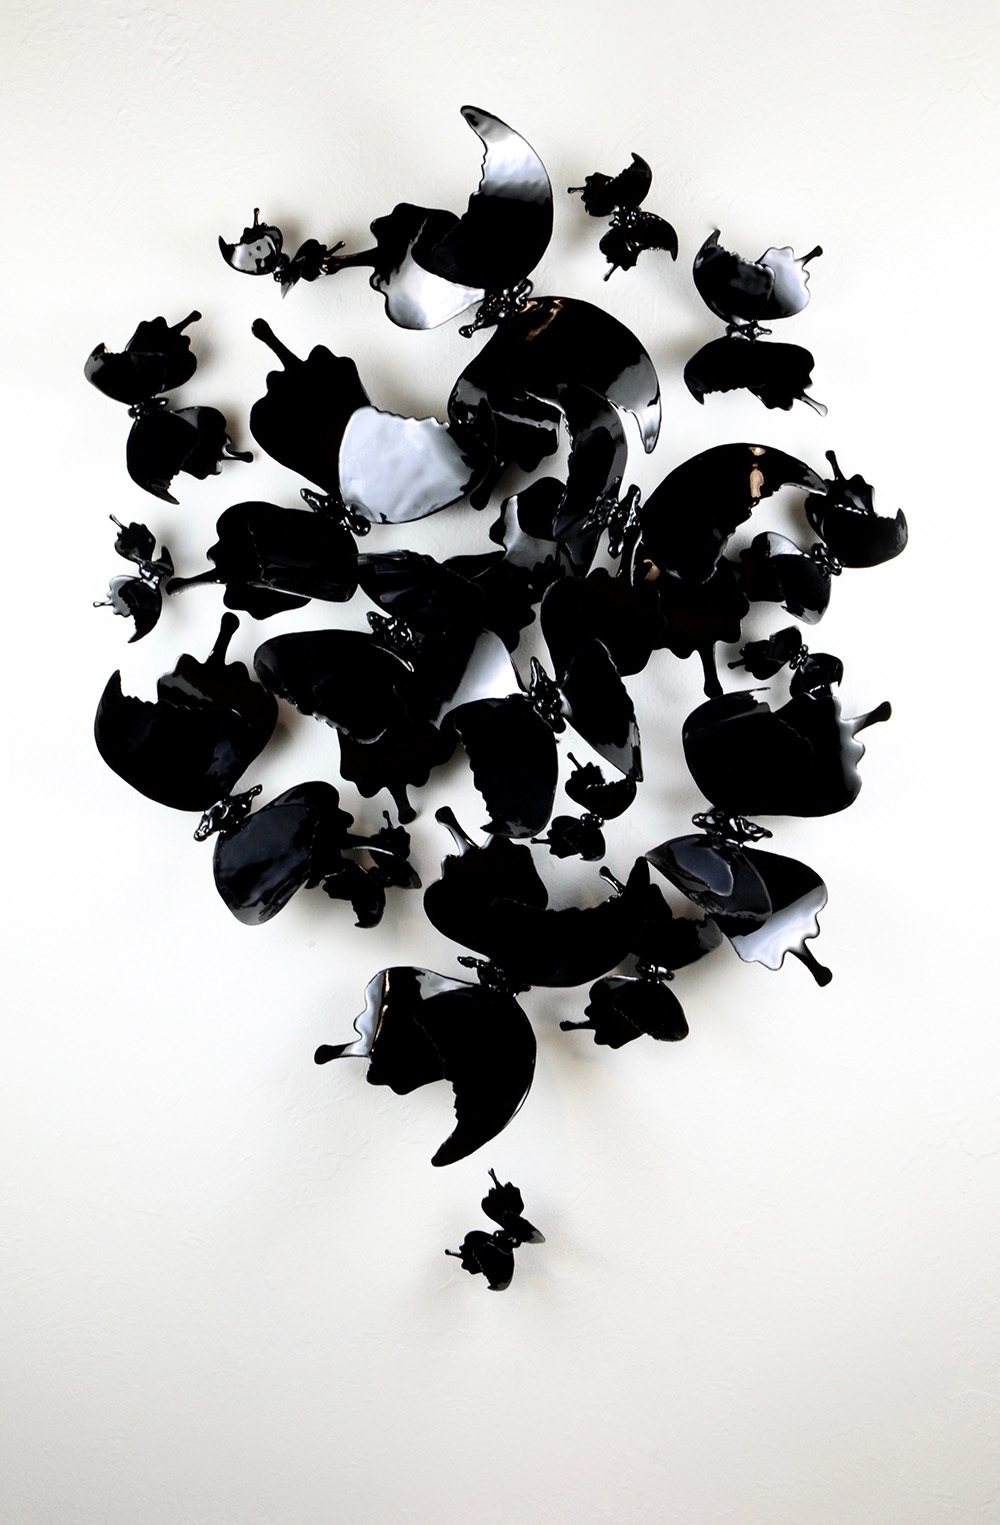 Christie Hackler's Thomas The Swallowtail piece comprising of a swarm of black metal butterflies